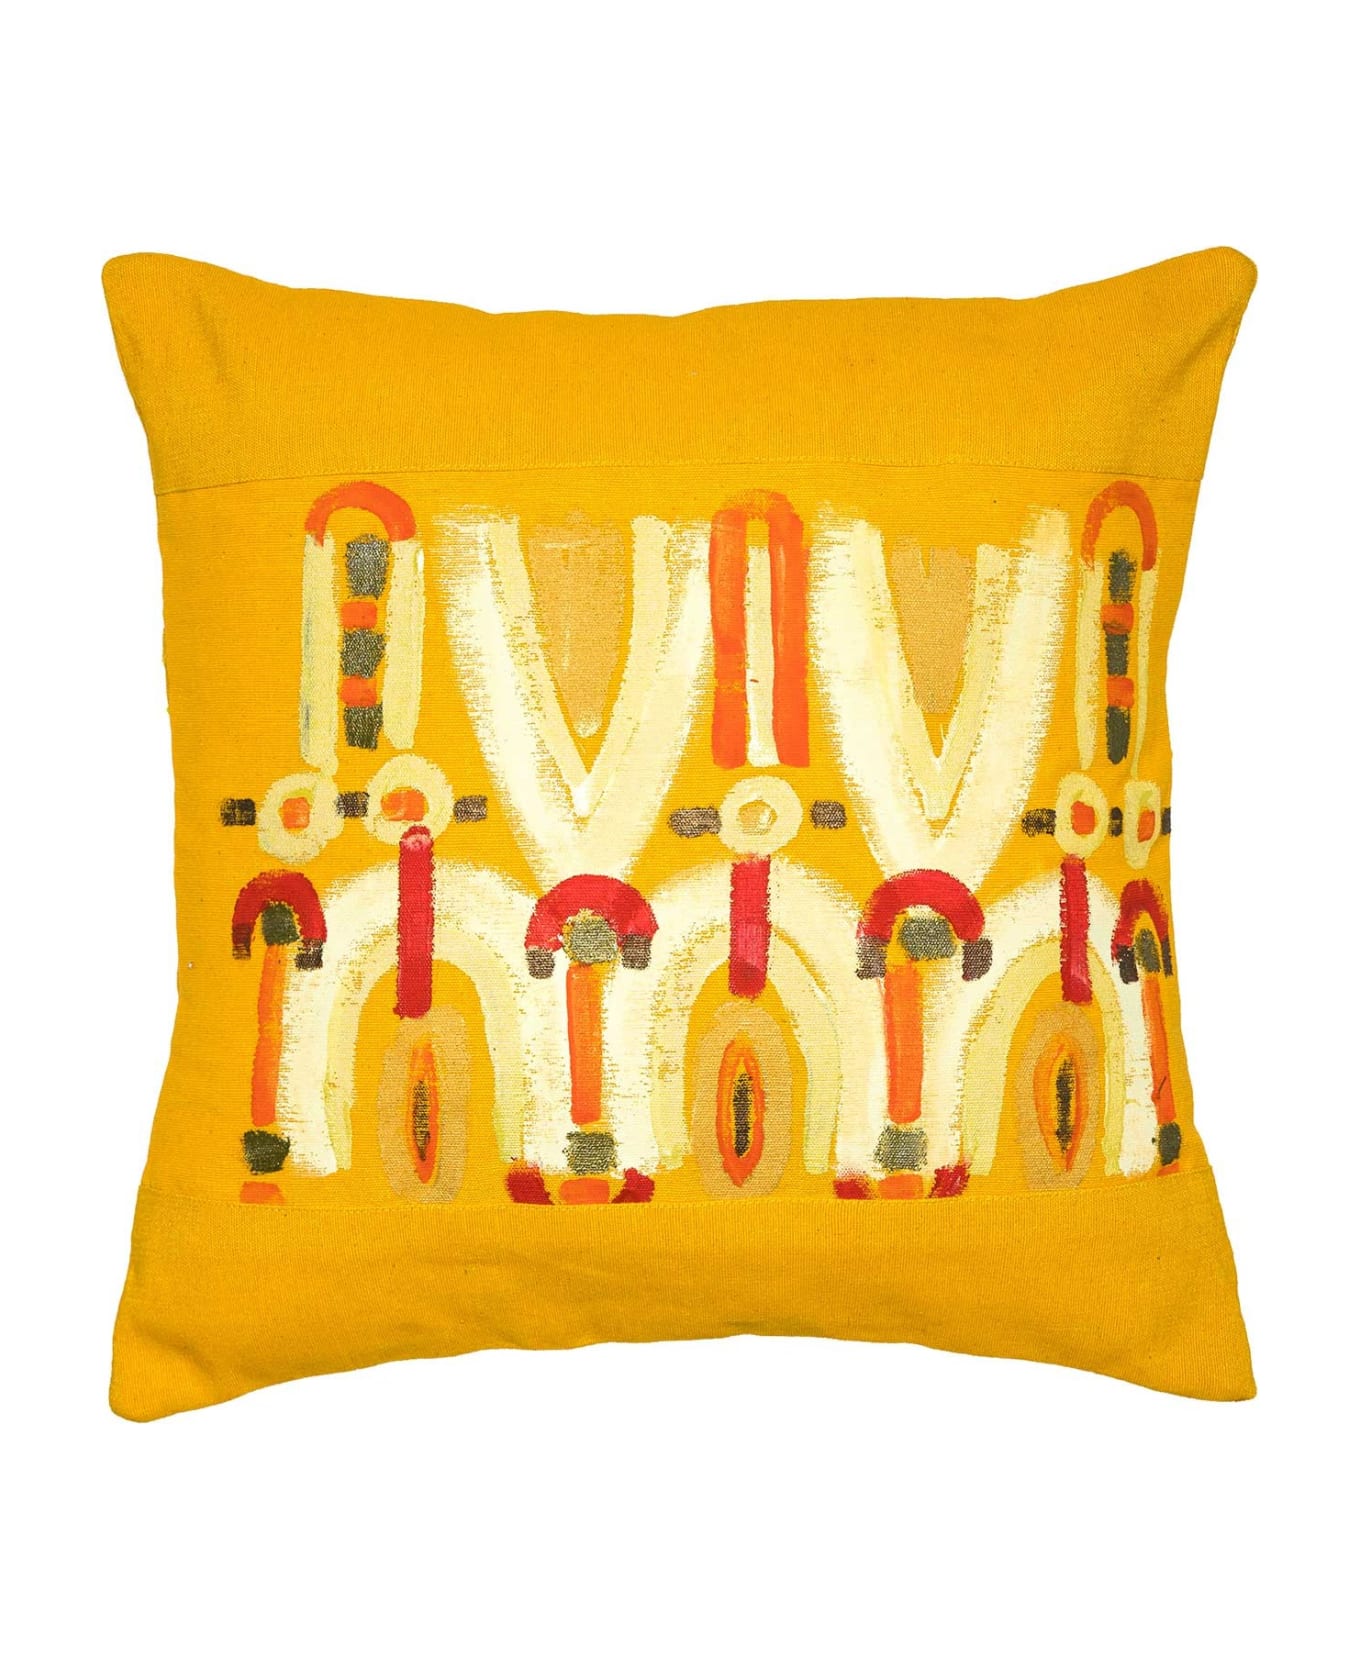 Le Botteghe su Gologone Cotton Hand Painted Indoor Cushion 60x60 cm - Yellow Fantasy